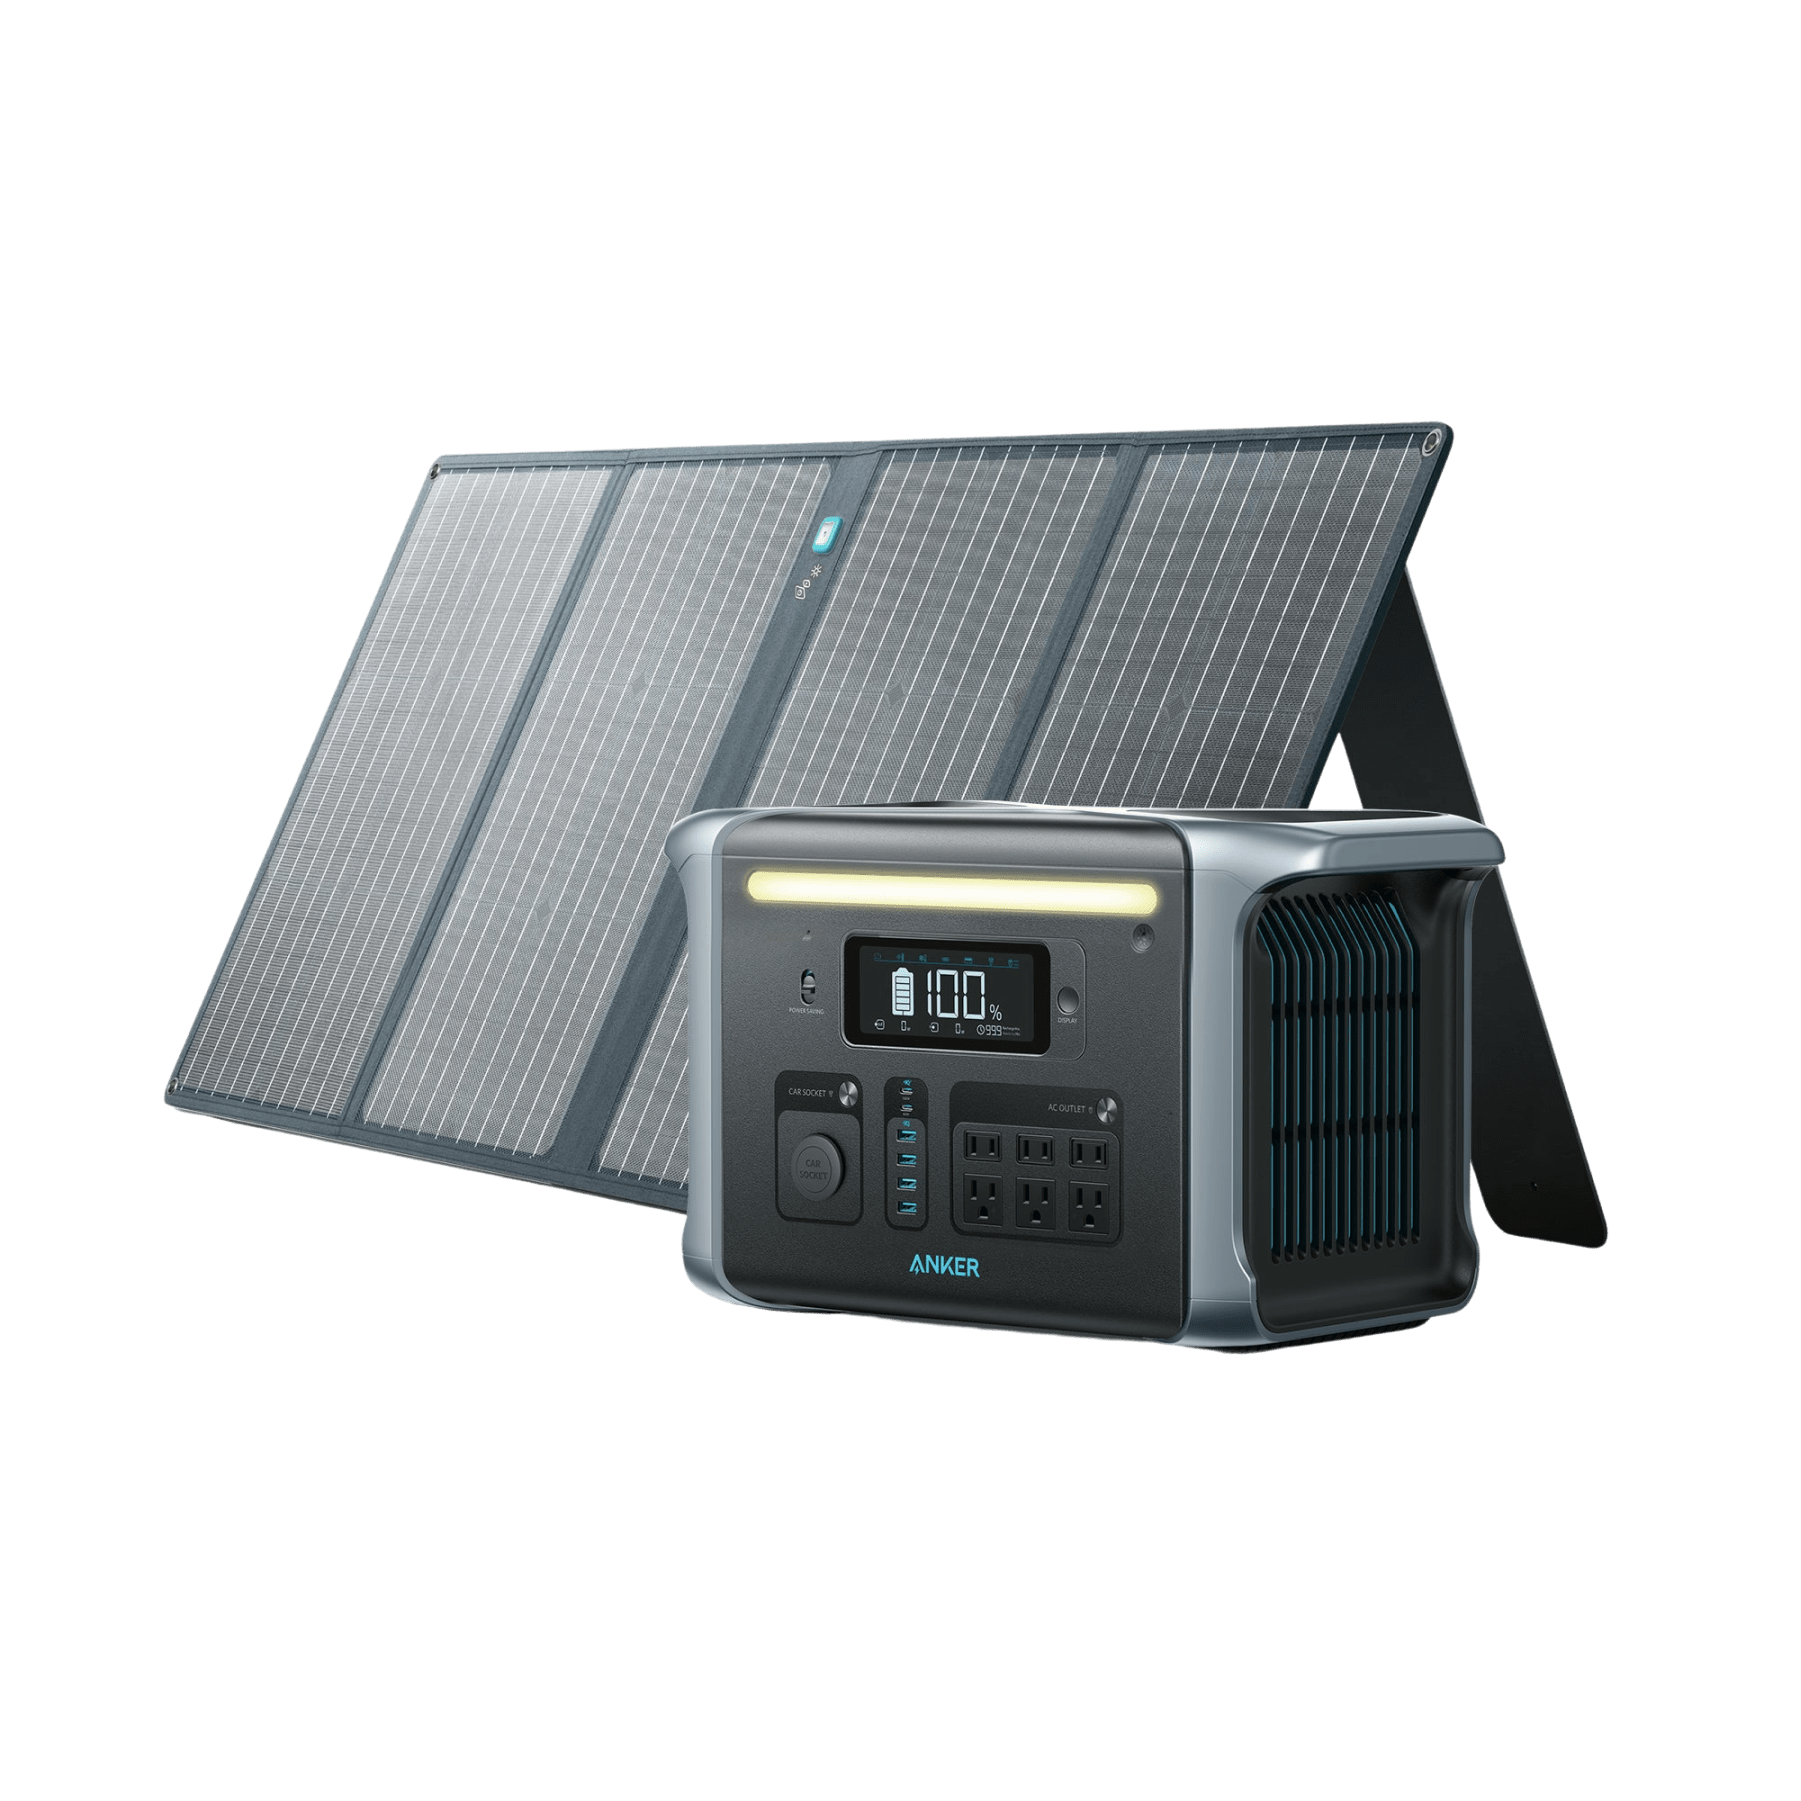 Anker SOLIX F1200 Solar Generator (Solar Generator 757 with 1x 100W Solar Panel) Anker In Stock Portable Power Stations